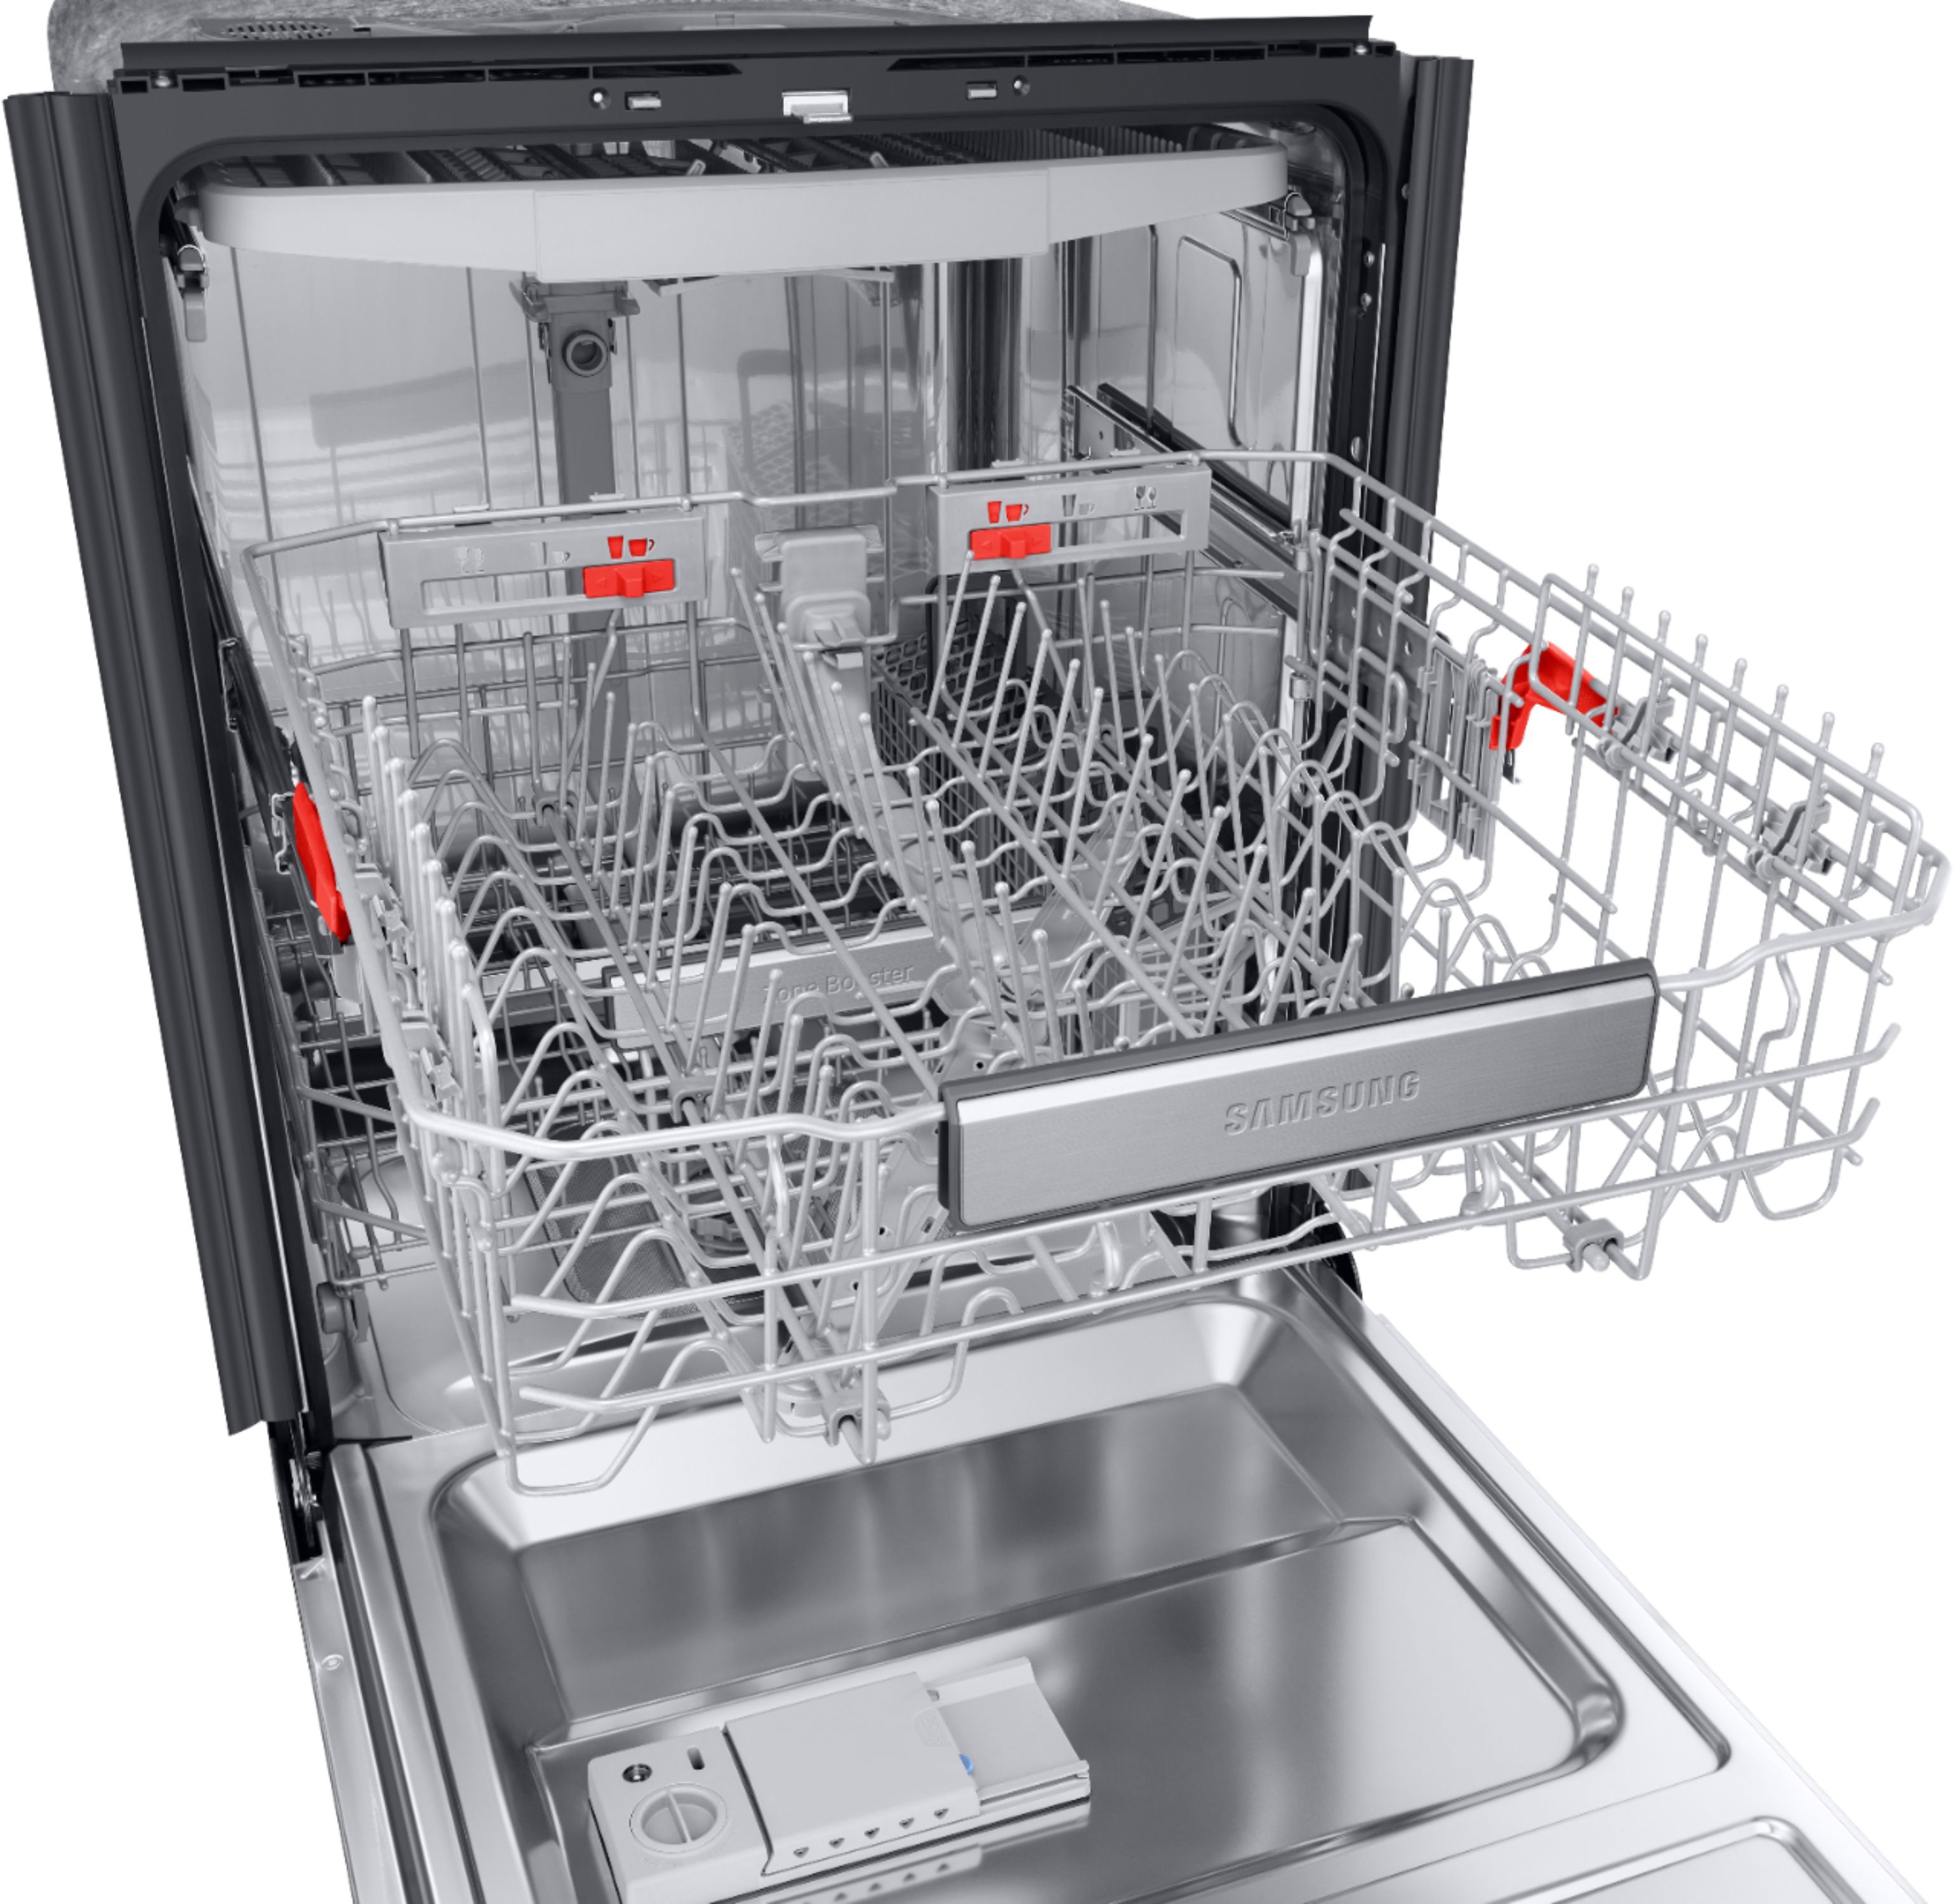 DW80H9950US in by Samsung in Key West, FL - DW80H9950US Top Control  Dishwasher with WaterWall Technology